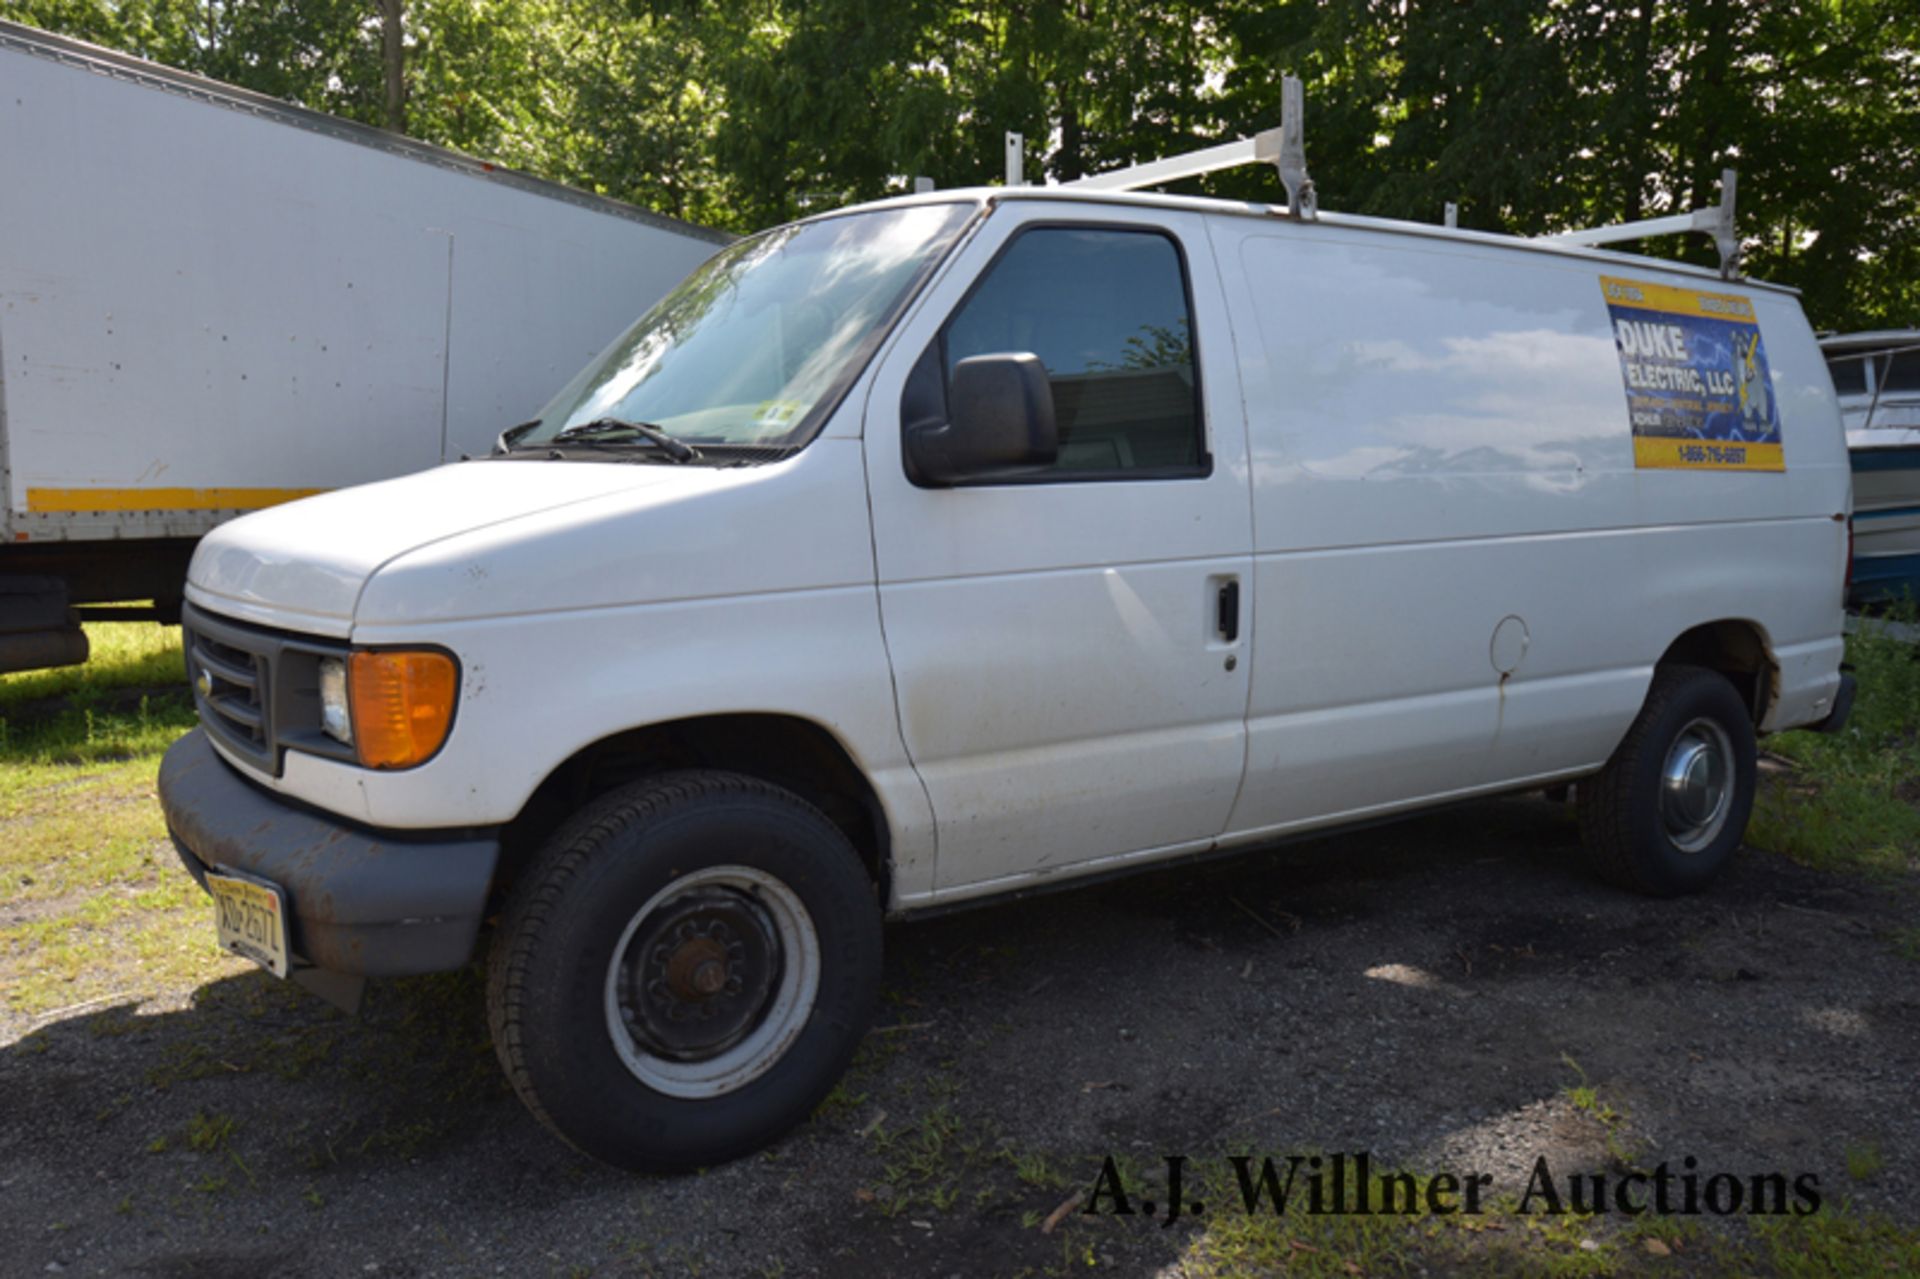 2006 Ford E250 Super-Duty Cargo van VIN 1FTNE24W66HB09381 221,710 miles indicated on odometer w/ 4- - Image 2 of 7